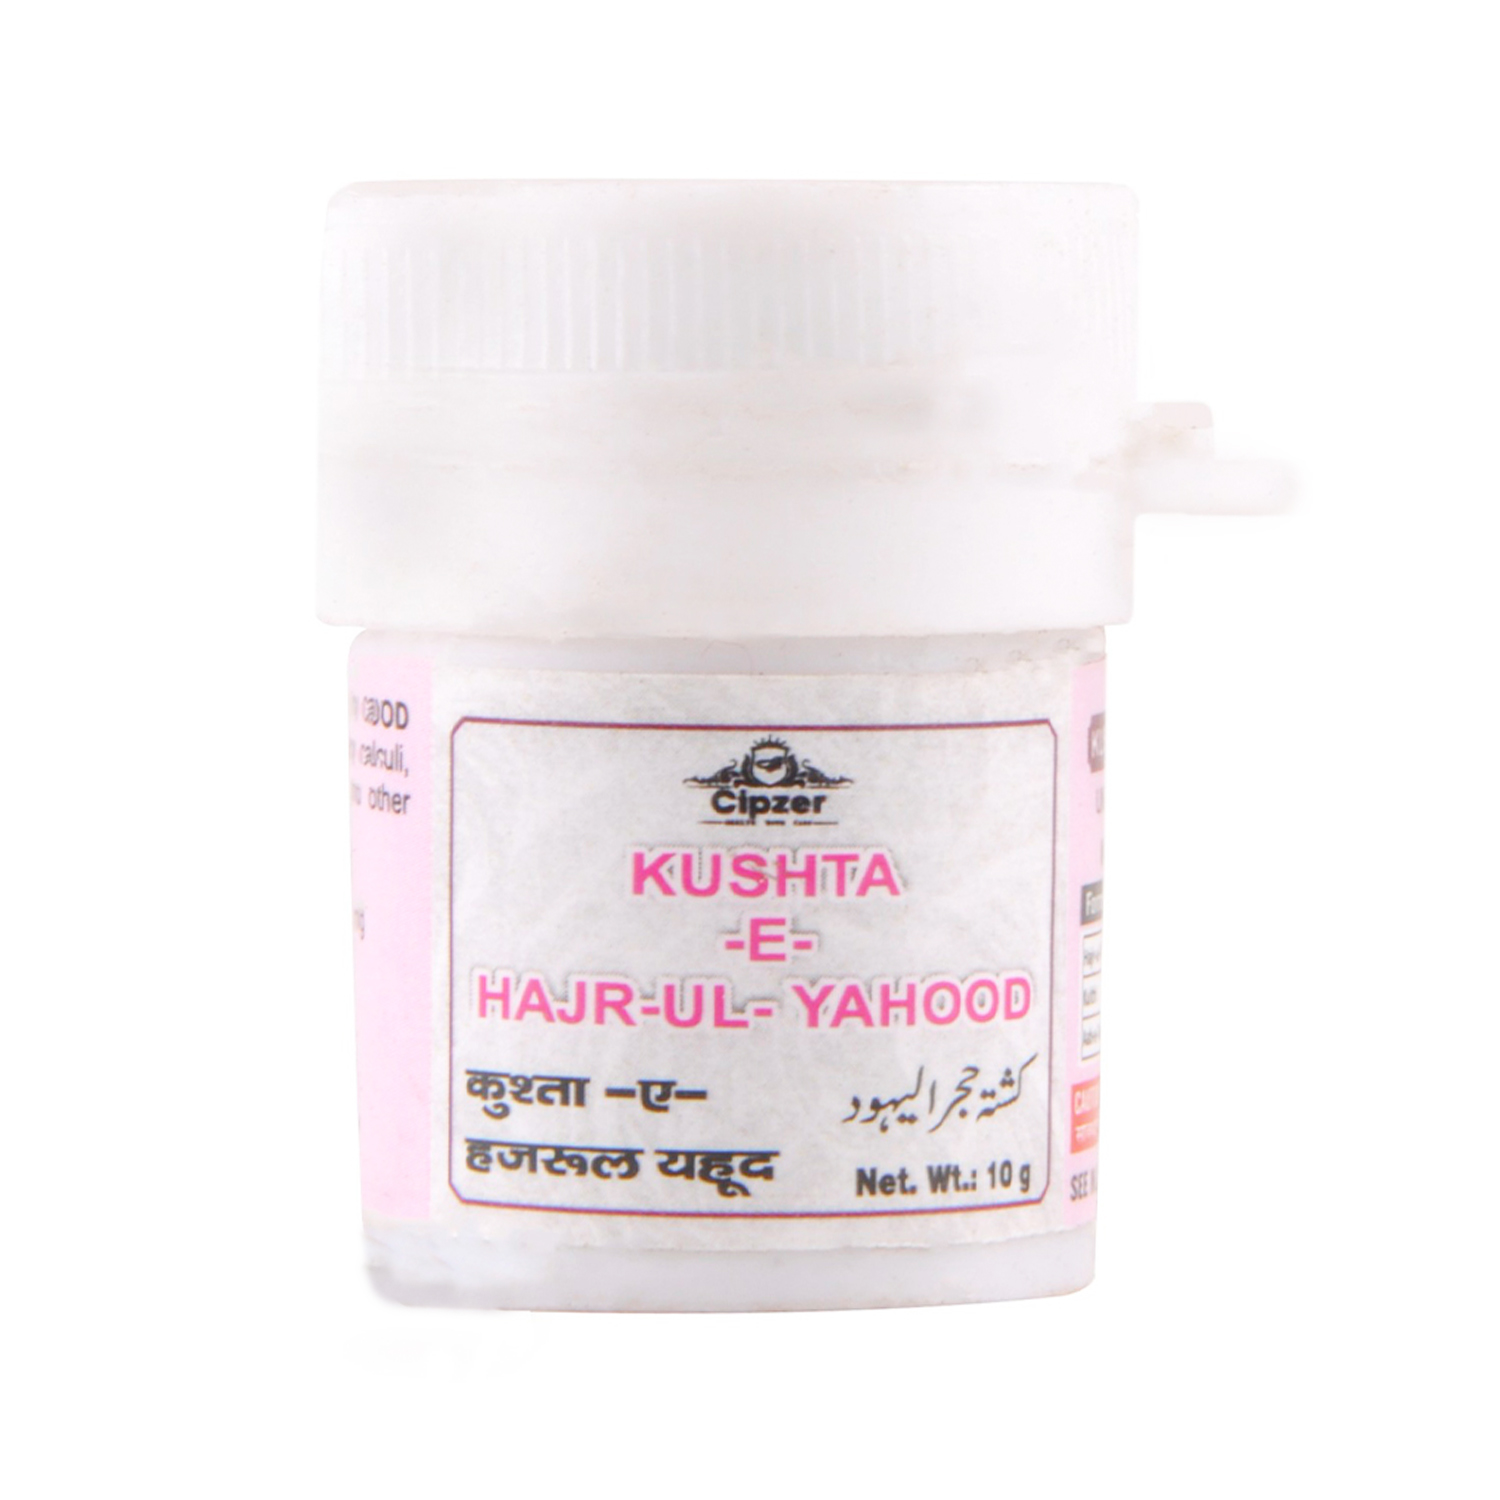 Kushta-E-Hajr-Ul-Yahood is very good for renal problems, Urethra, and urinary bladder